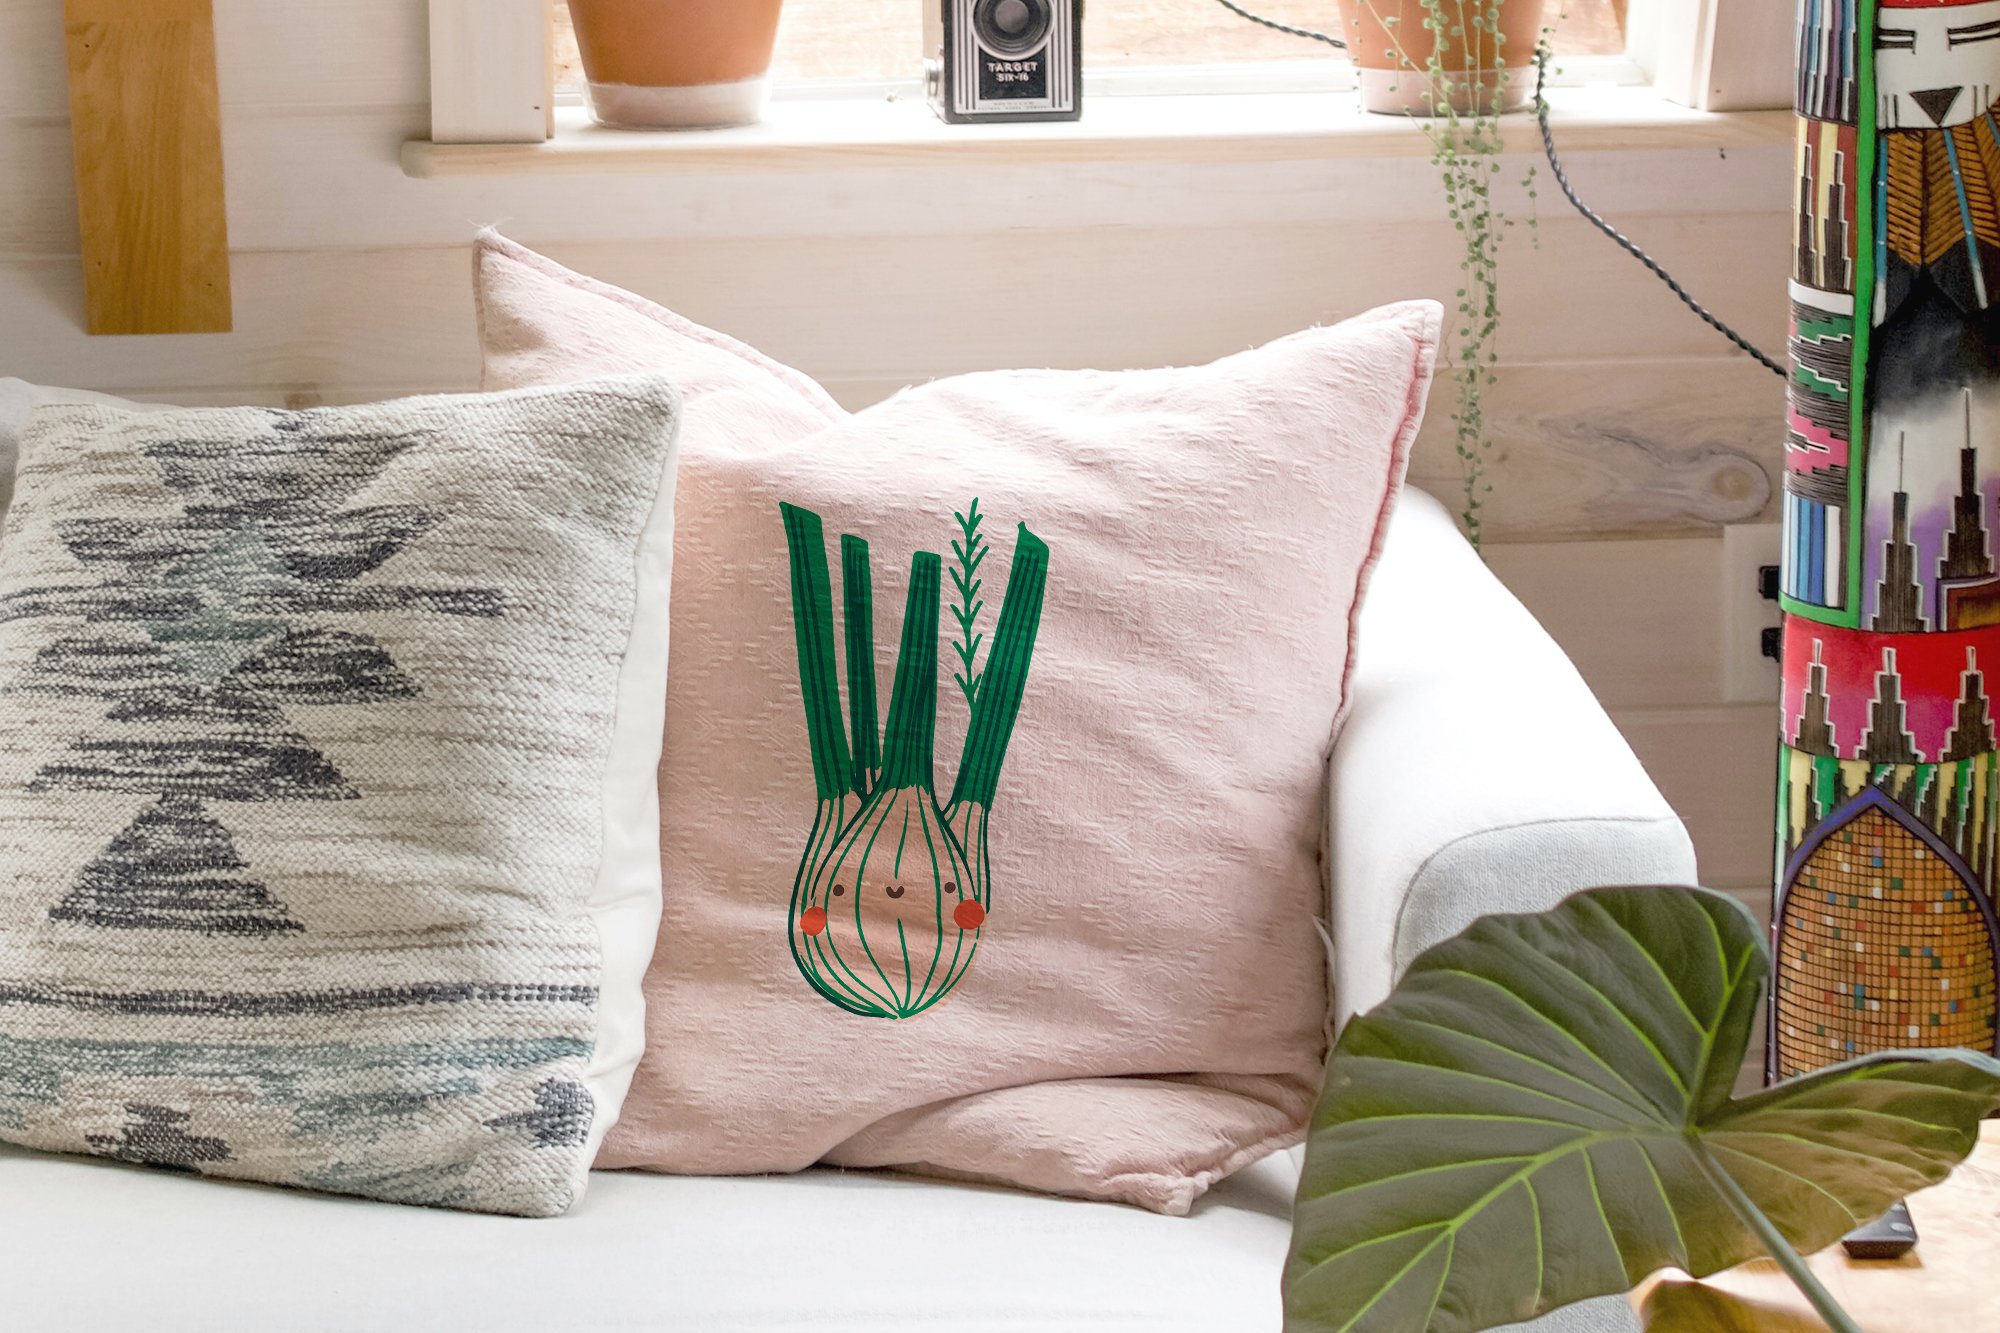 Creative onion graphic on a pastel pillow.